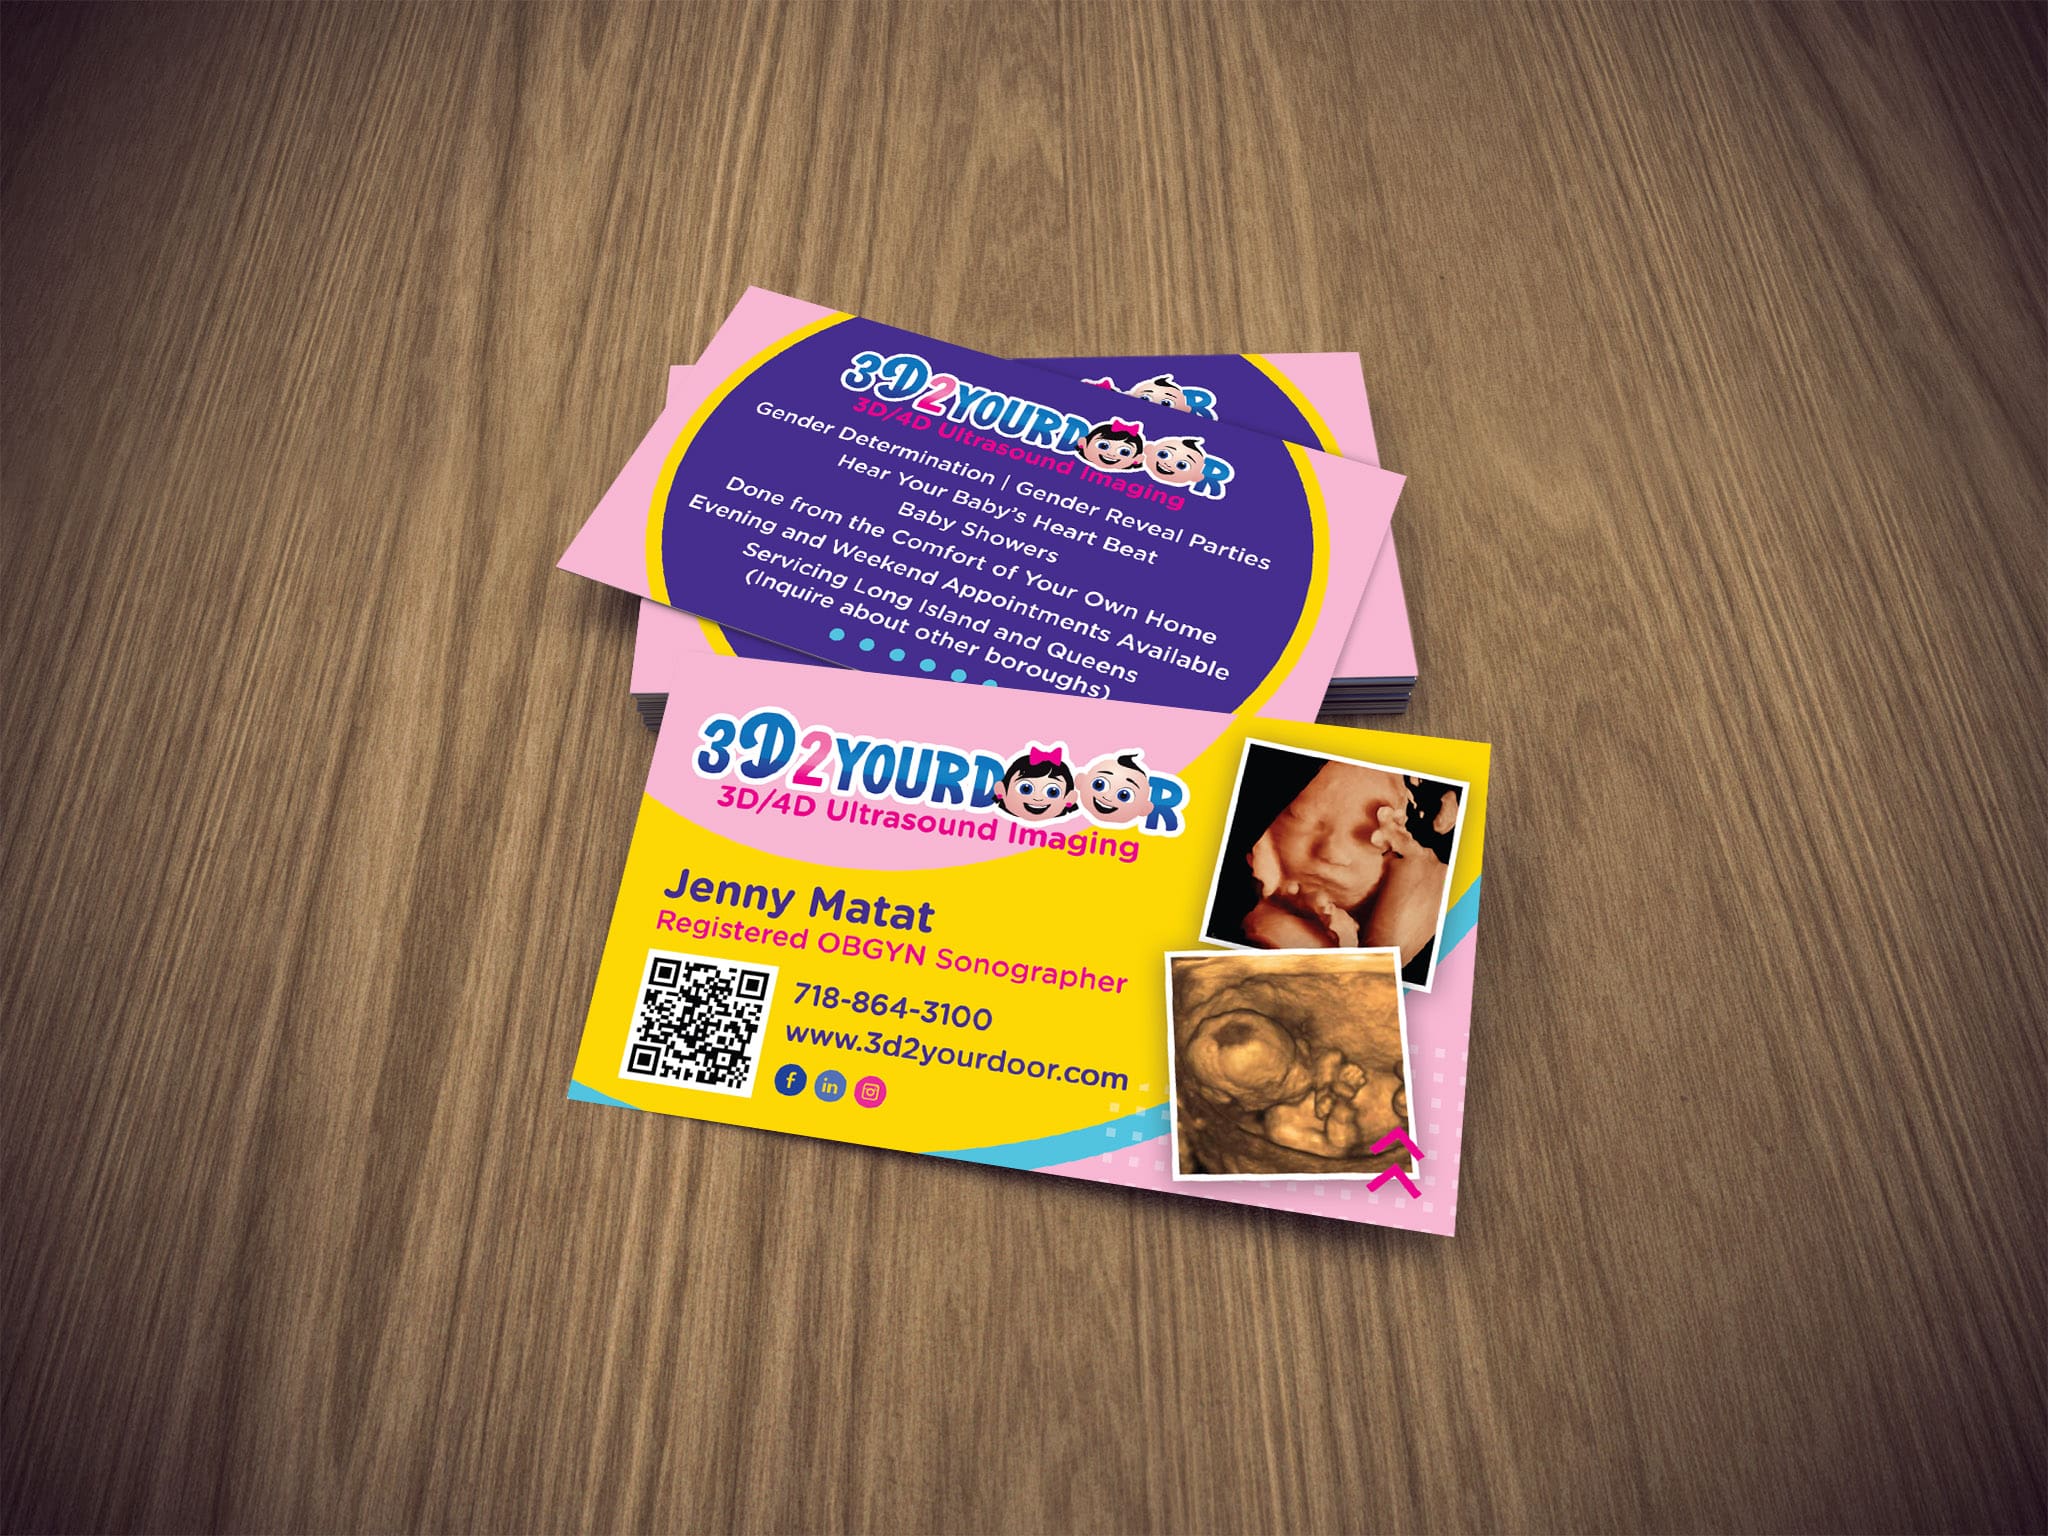 Mobile Ultrasound Imaging Business Card